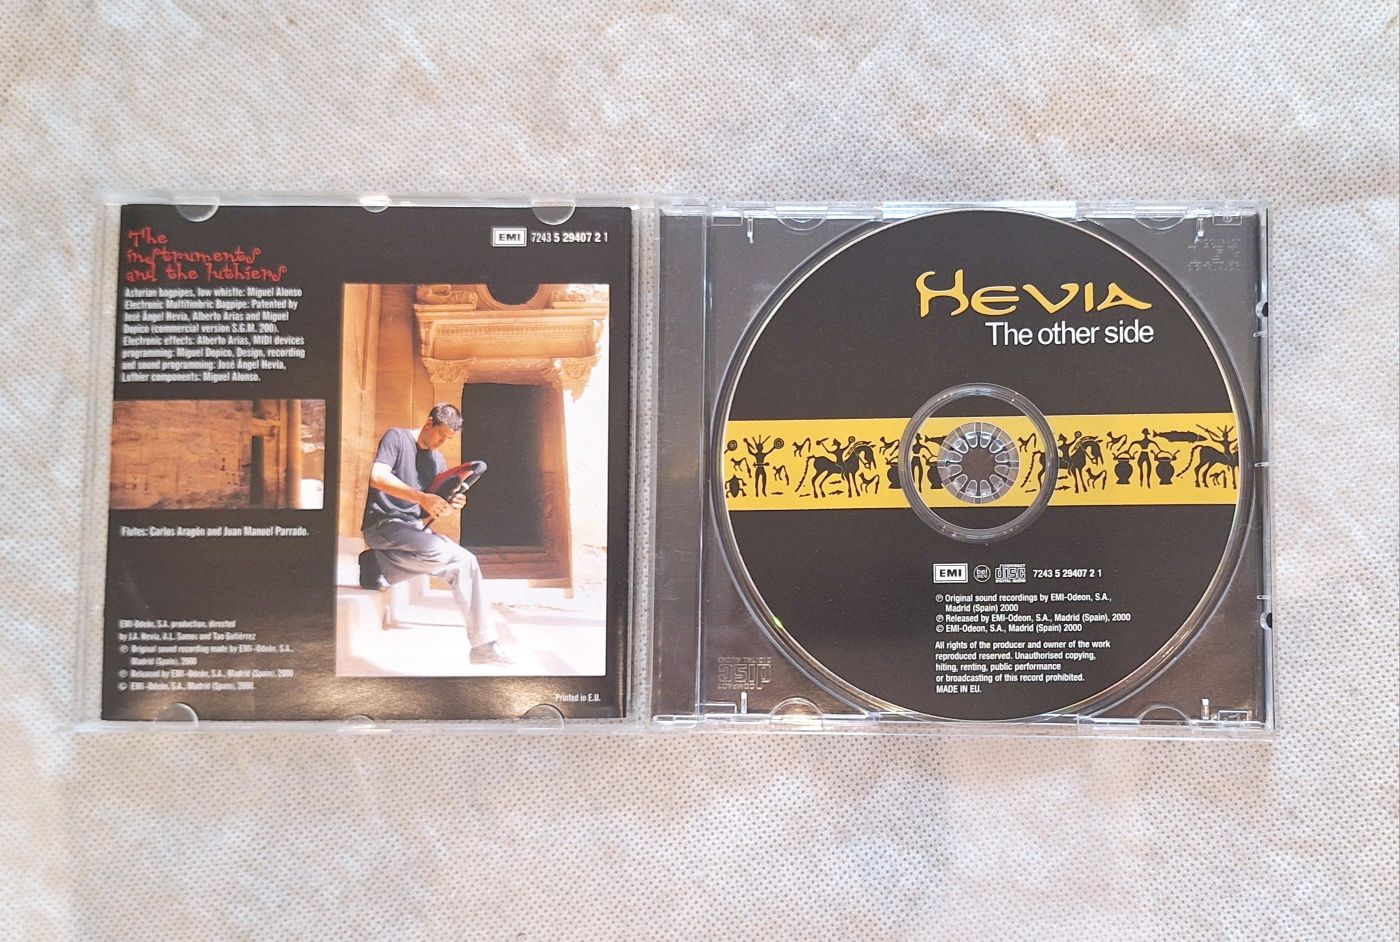 CD Hevia – The Other Side